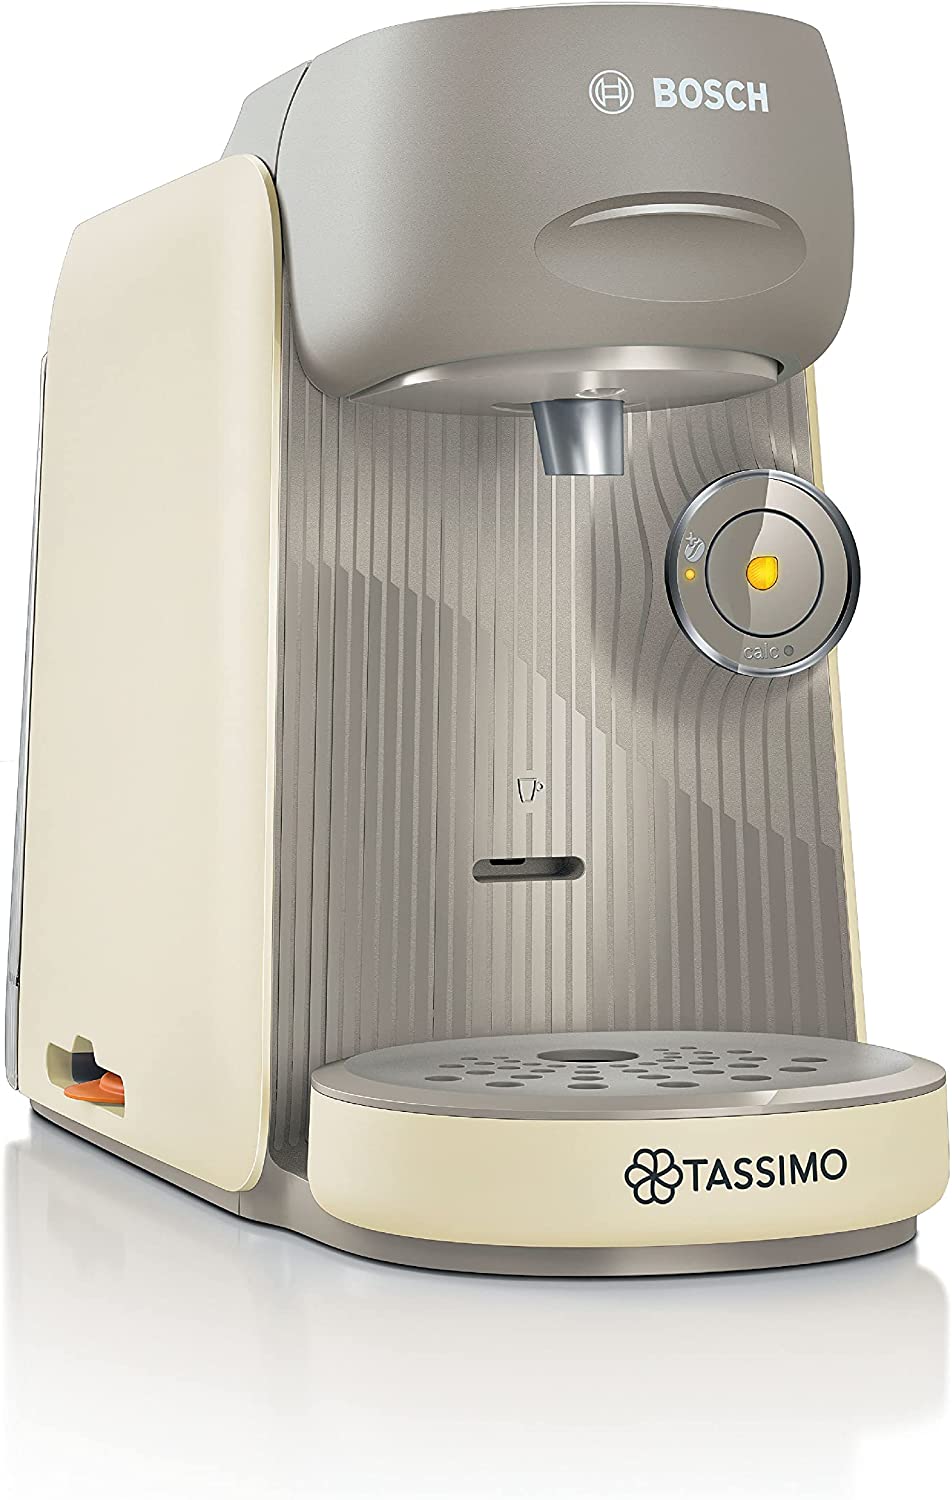 Tassimo Finesse Capsule Machine TAS16B7 Coffee Machine by Bosch, 70 Drinks, Intense Coffee at the Push, Automatic Shut-Off, Perfectly Dosed, Space-Saving, 1400 W, Cream